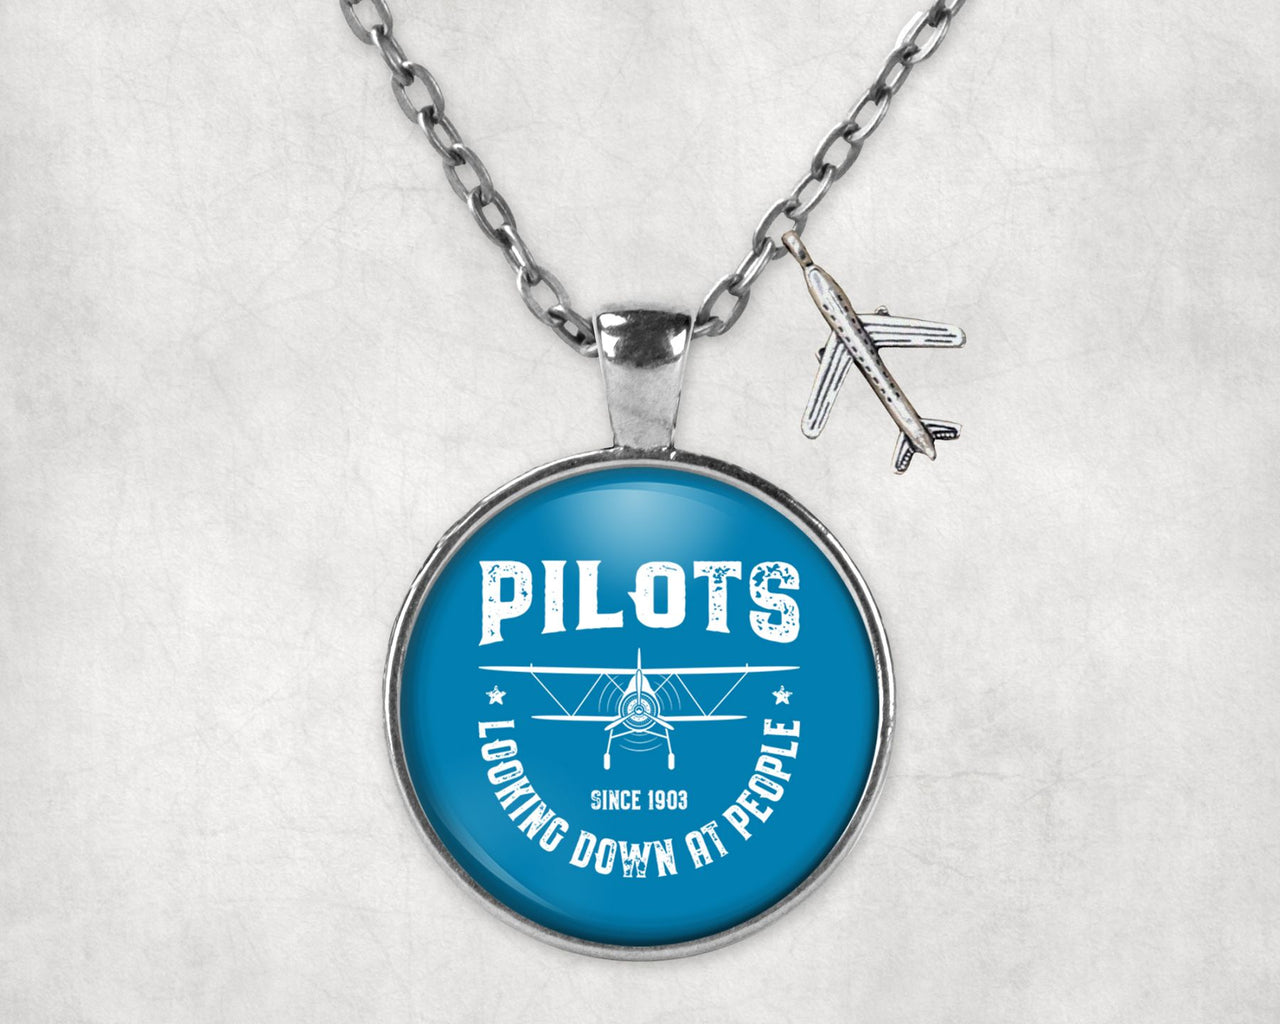 Pilots Looking Down at People Since 1903 Designed Necklaces